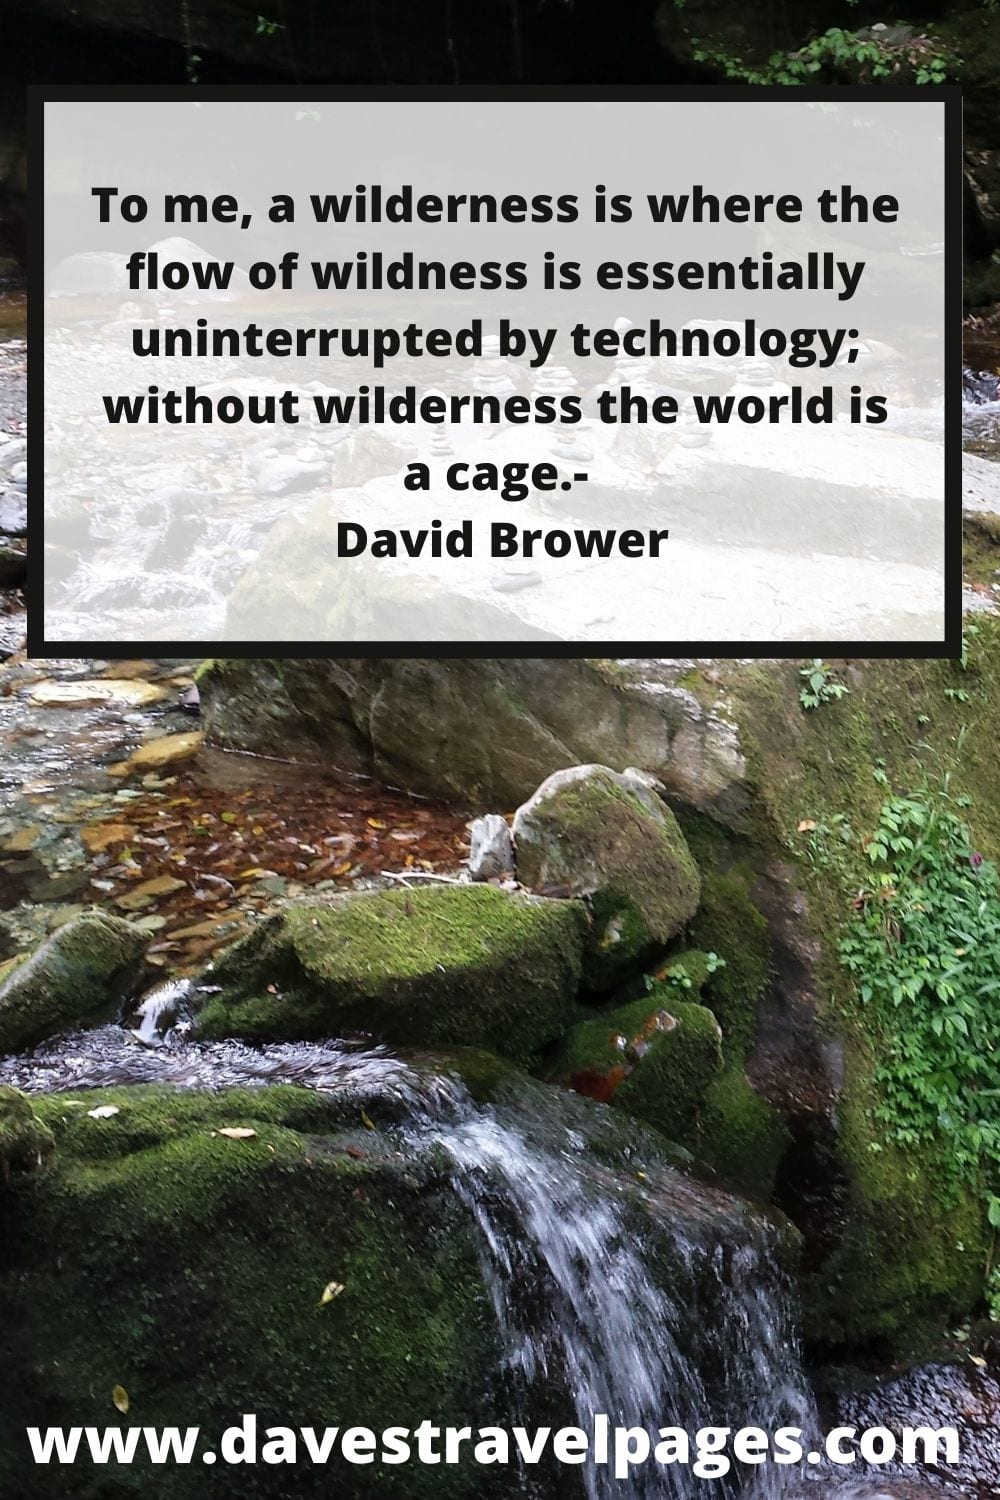 To me, a wilderness is where the flow of wildness is essentially uninterrupted by technology; without wilderness the world is a cage. - David Brower